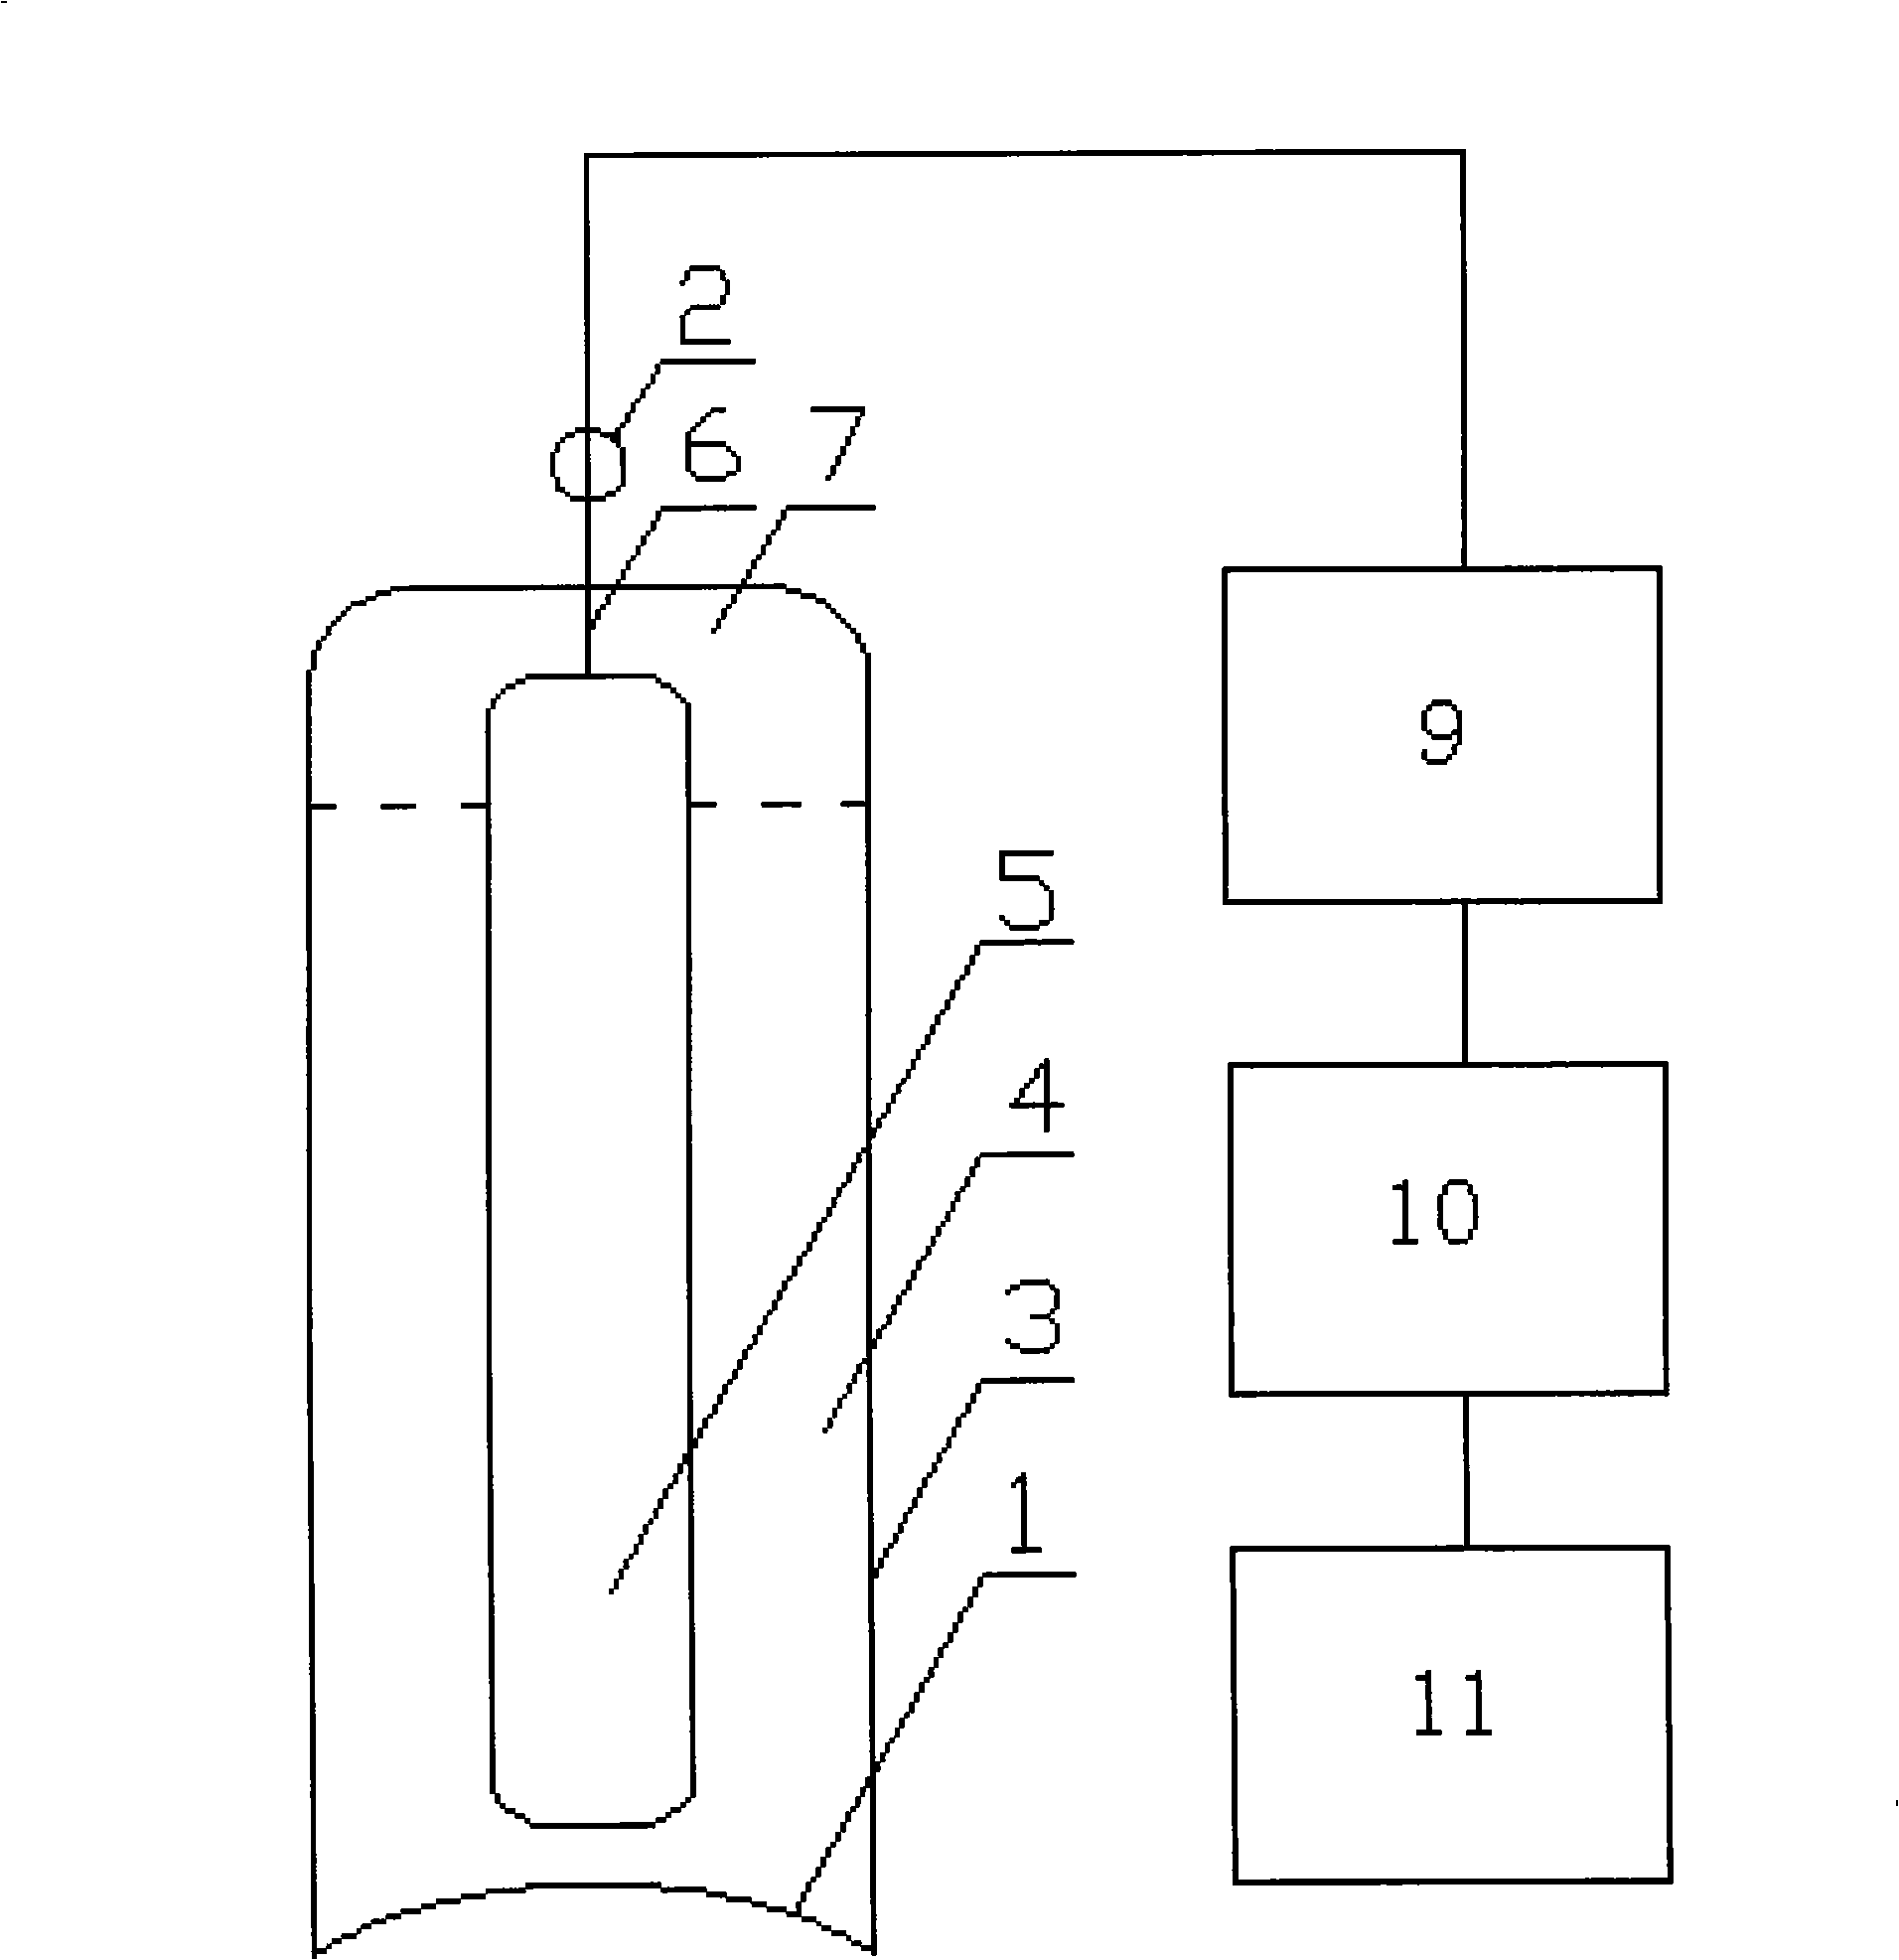 Method for monitoring gas pipeline internal corrosion